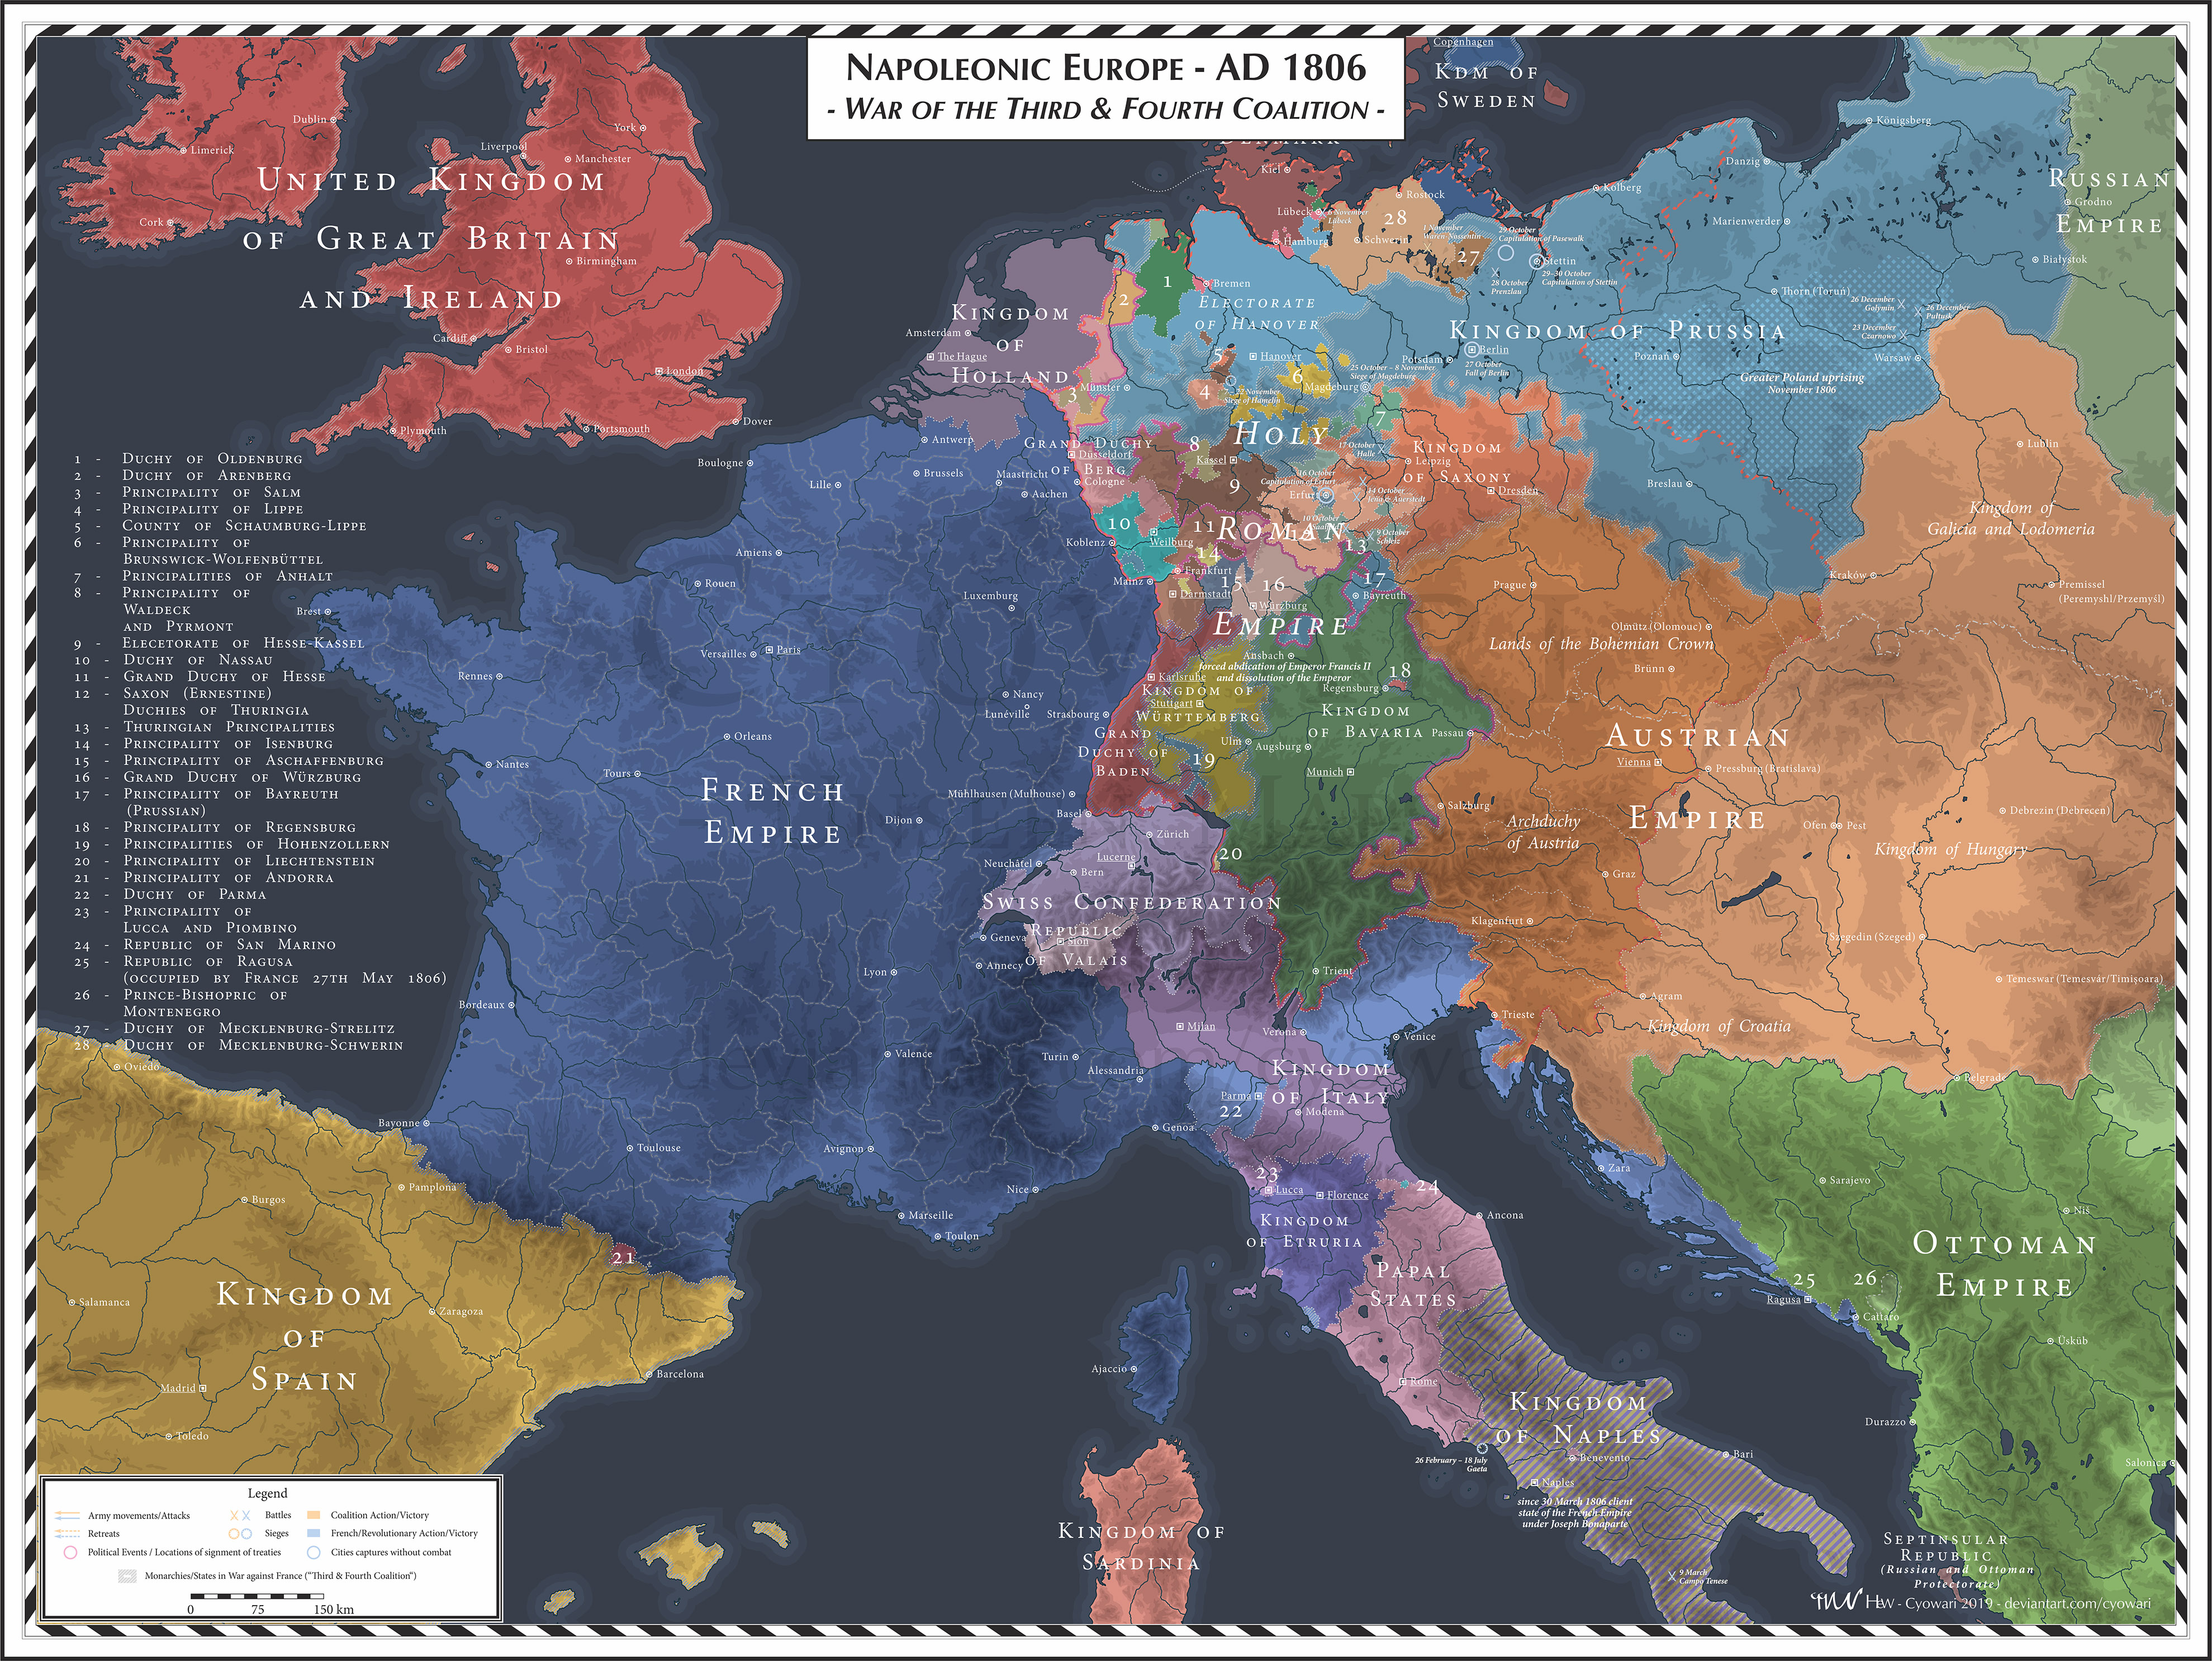 Napoleonic Europe - 1806 - 3rd and 4th Coalition